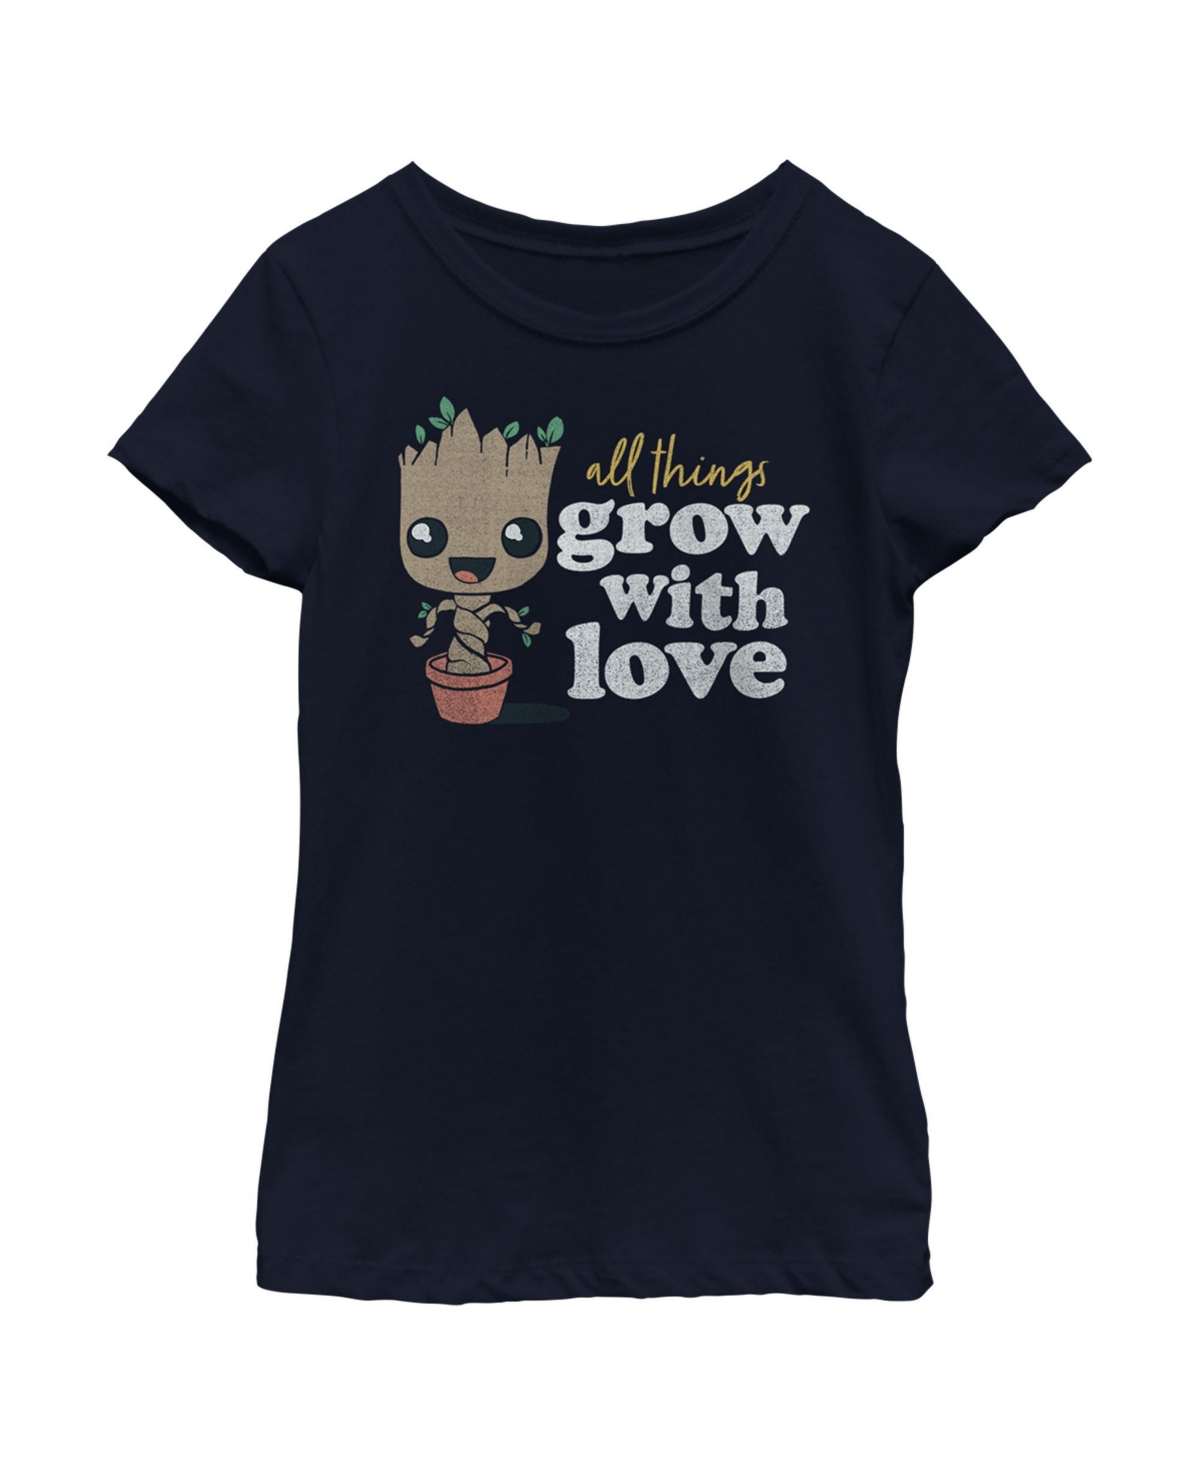 Marvel Girl's Guardians Of The Galaxy Groot All Things Grow With Love Child T-shirt In Navy Blue